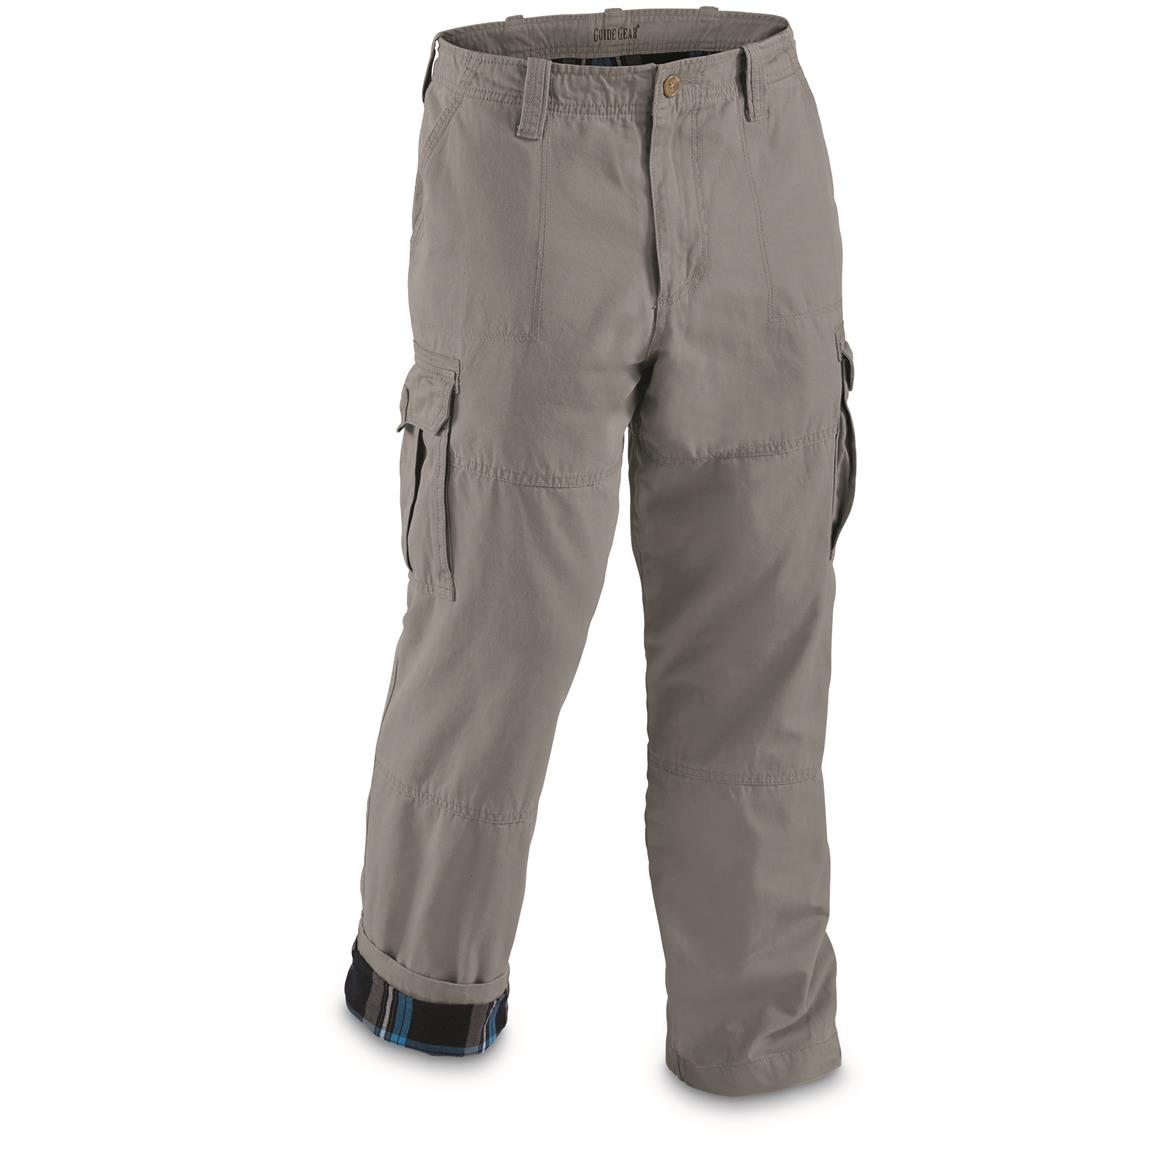 Guide Gear Men's Flannel Lined Cargo Pants - 224165, Insulated Pants ...